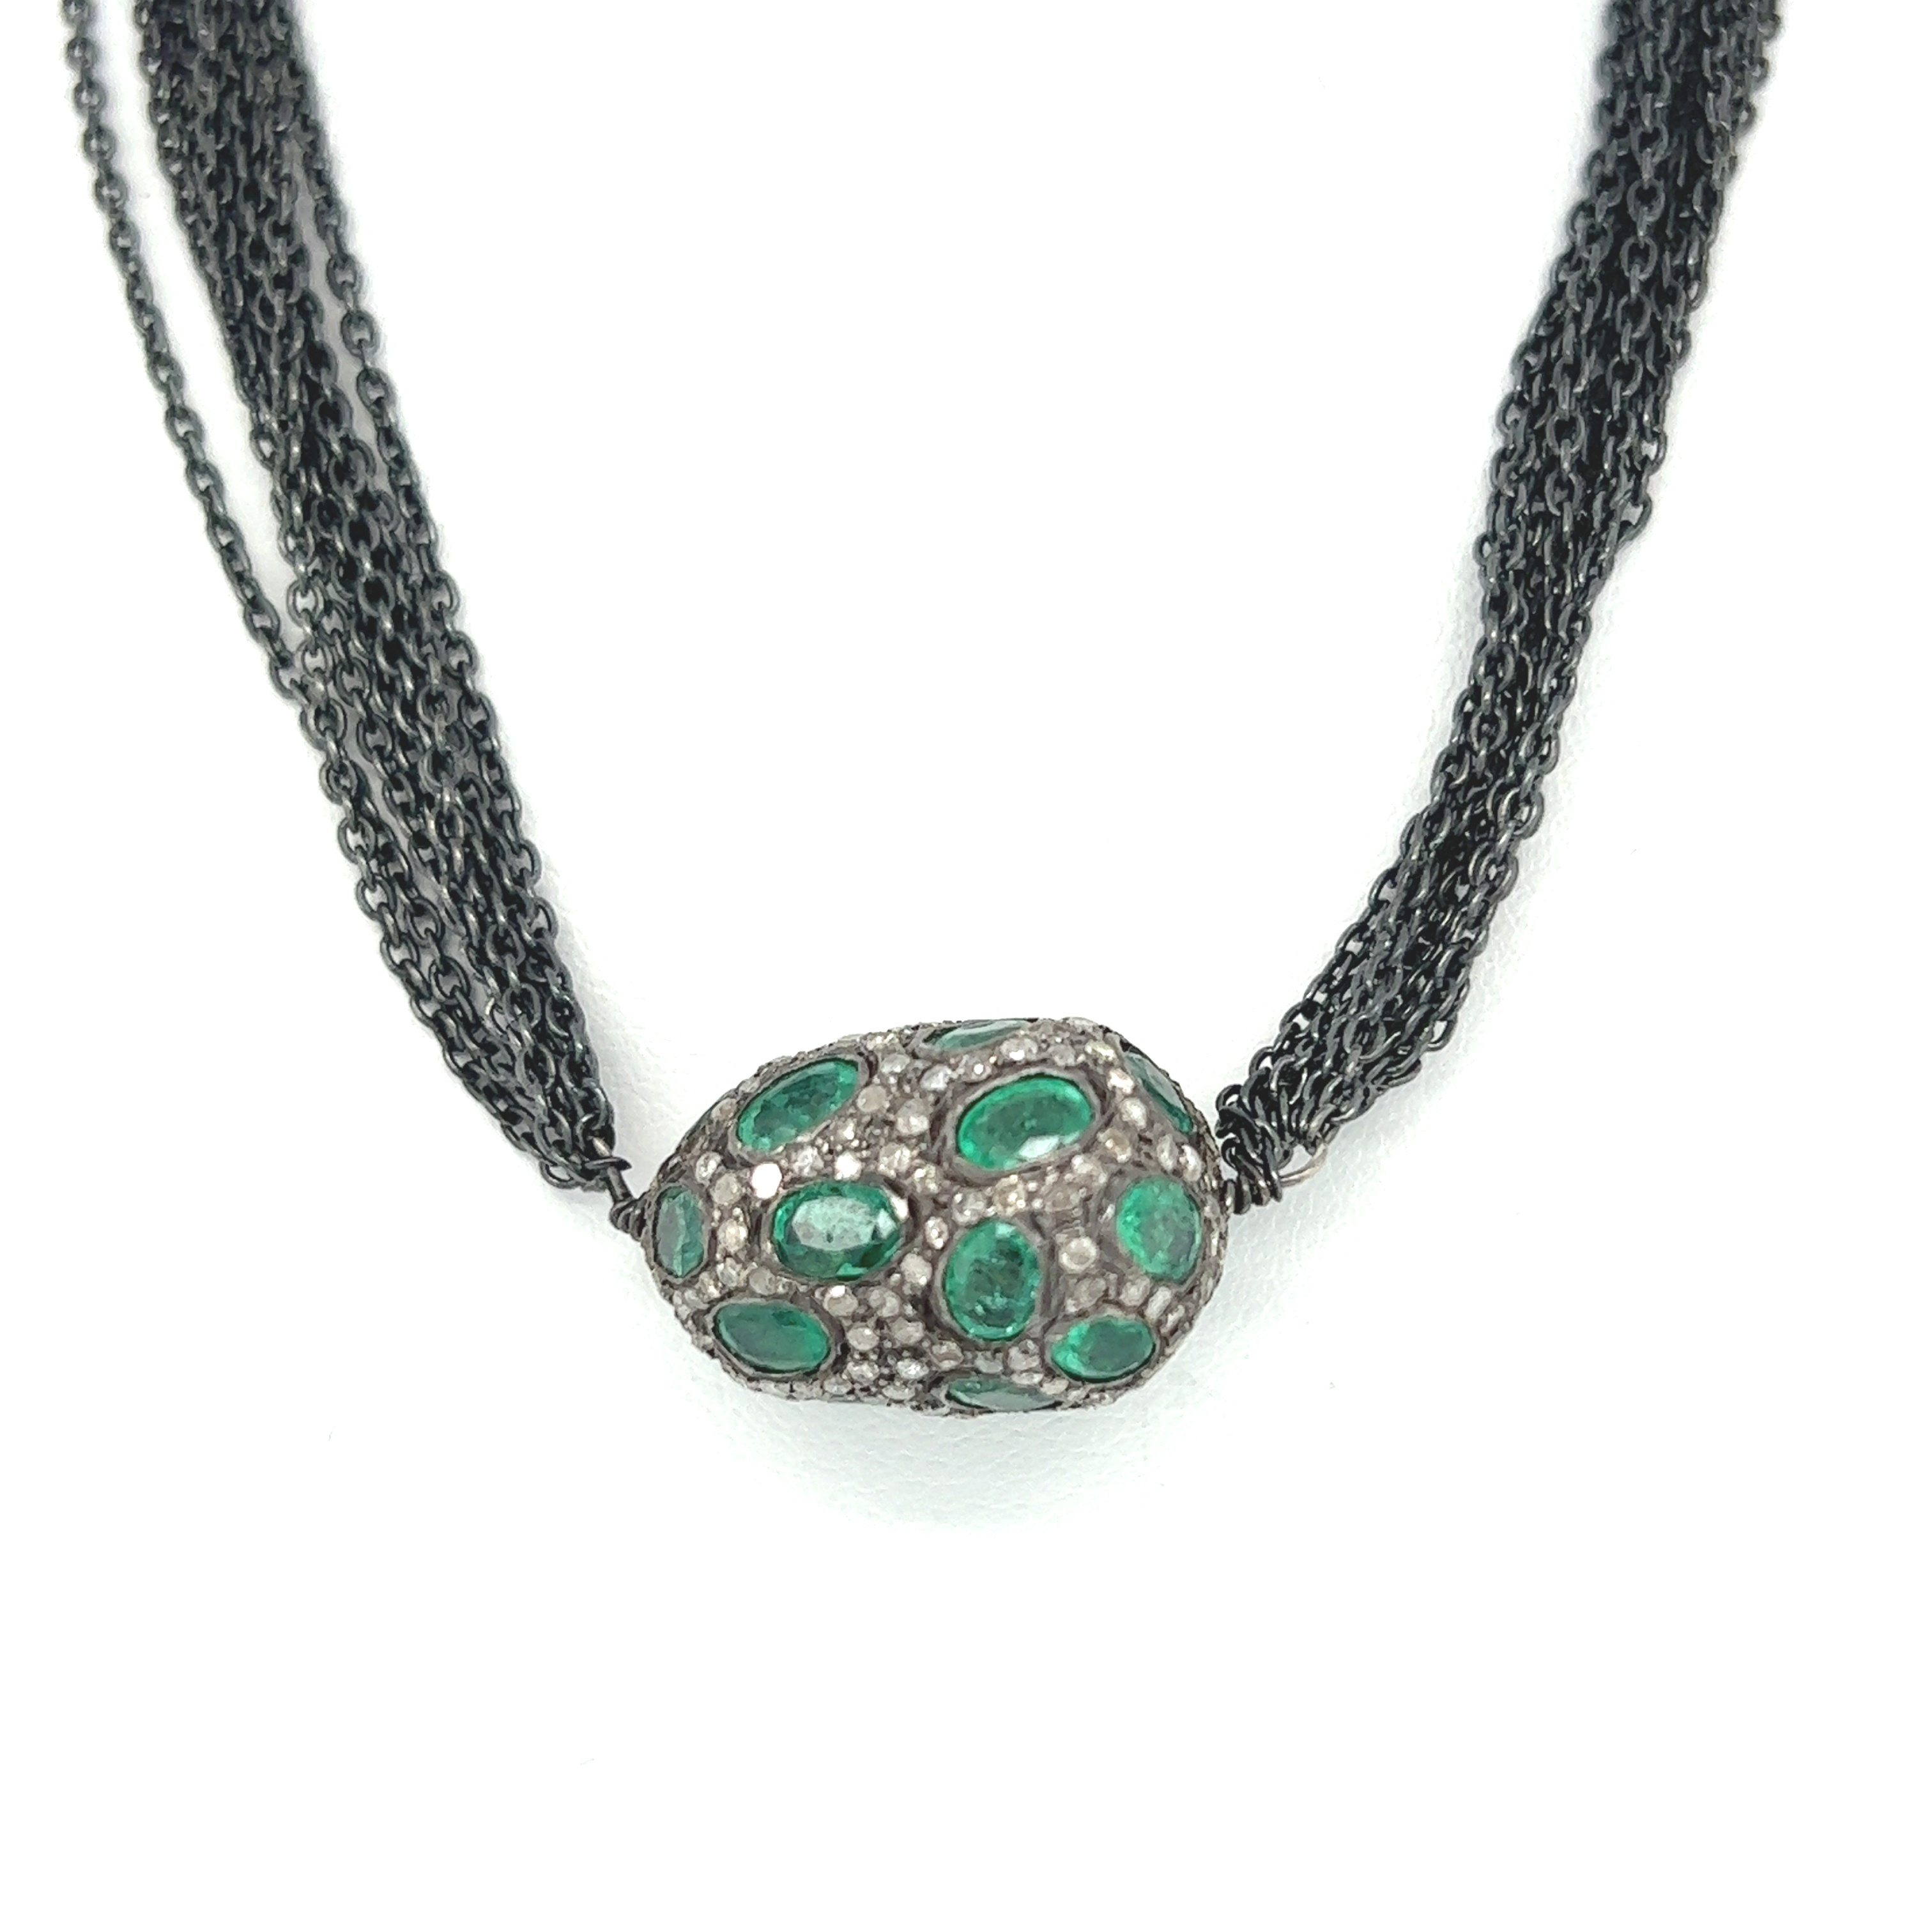 Featured image for “Emerald and Pave Diamond Nugget Necklace”